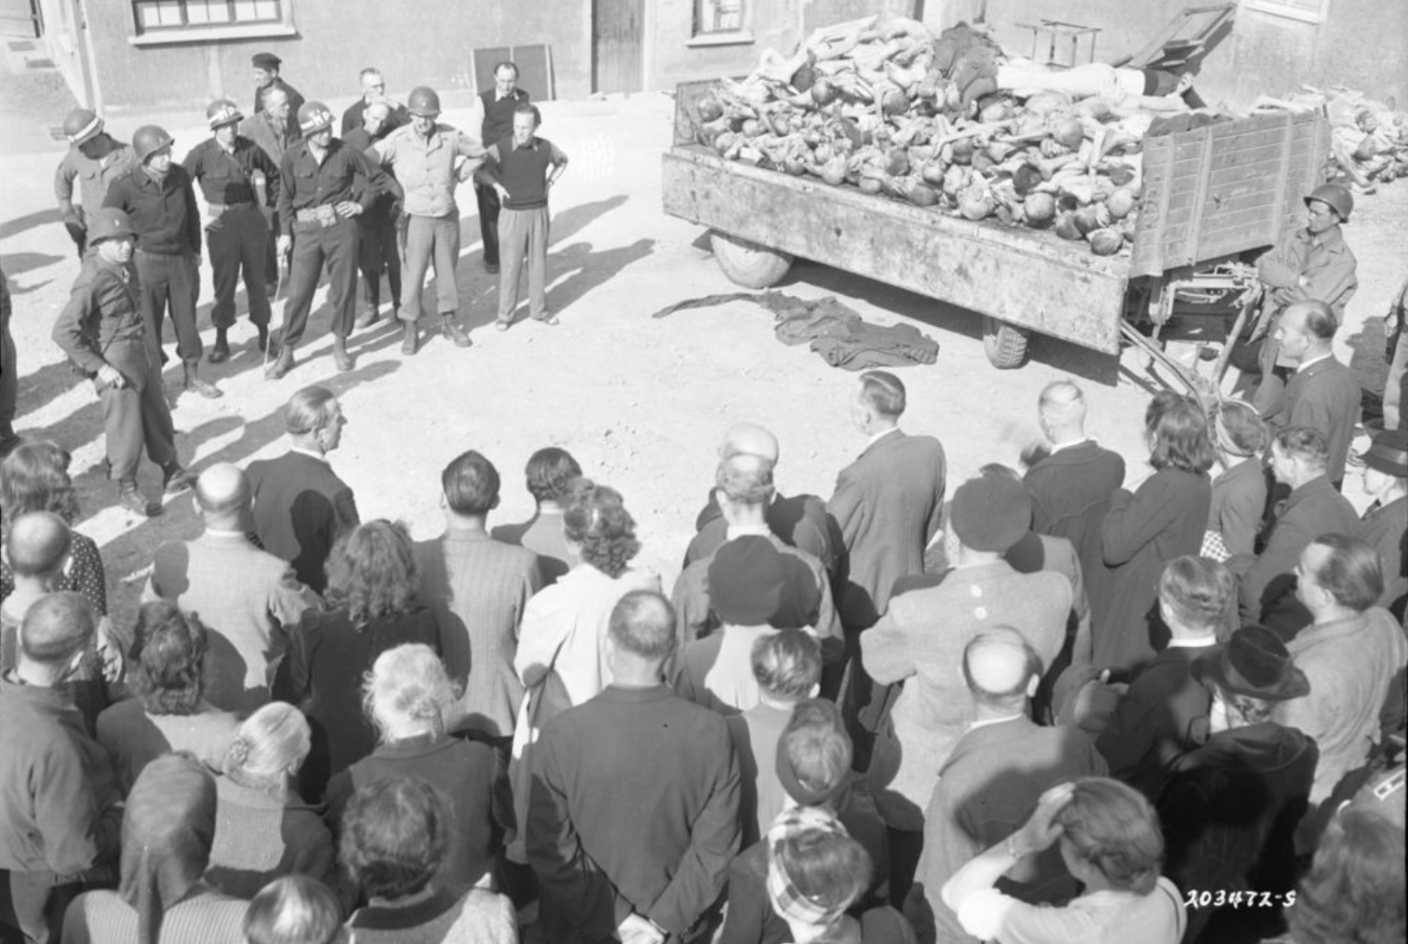 Residents of Weimar during the tour of Buchenwald concentration camp ordered by the Americans in the courtyard of the crematorium in front of a truck trailer loaded with corpses. To the left of the trailer, wearing a steel helmet and light-colored jacket, the American commander Lorenz Schmuhl.